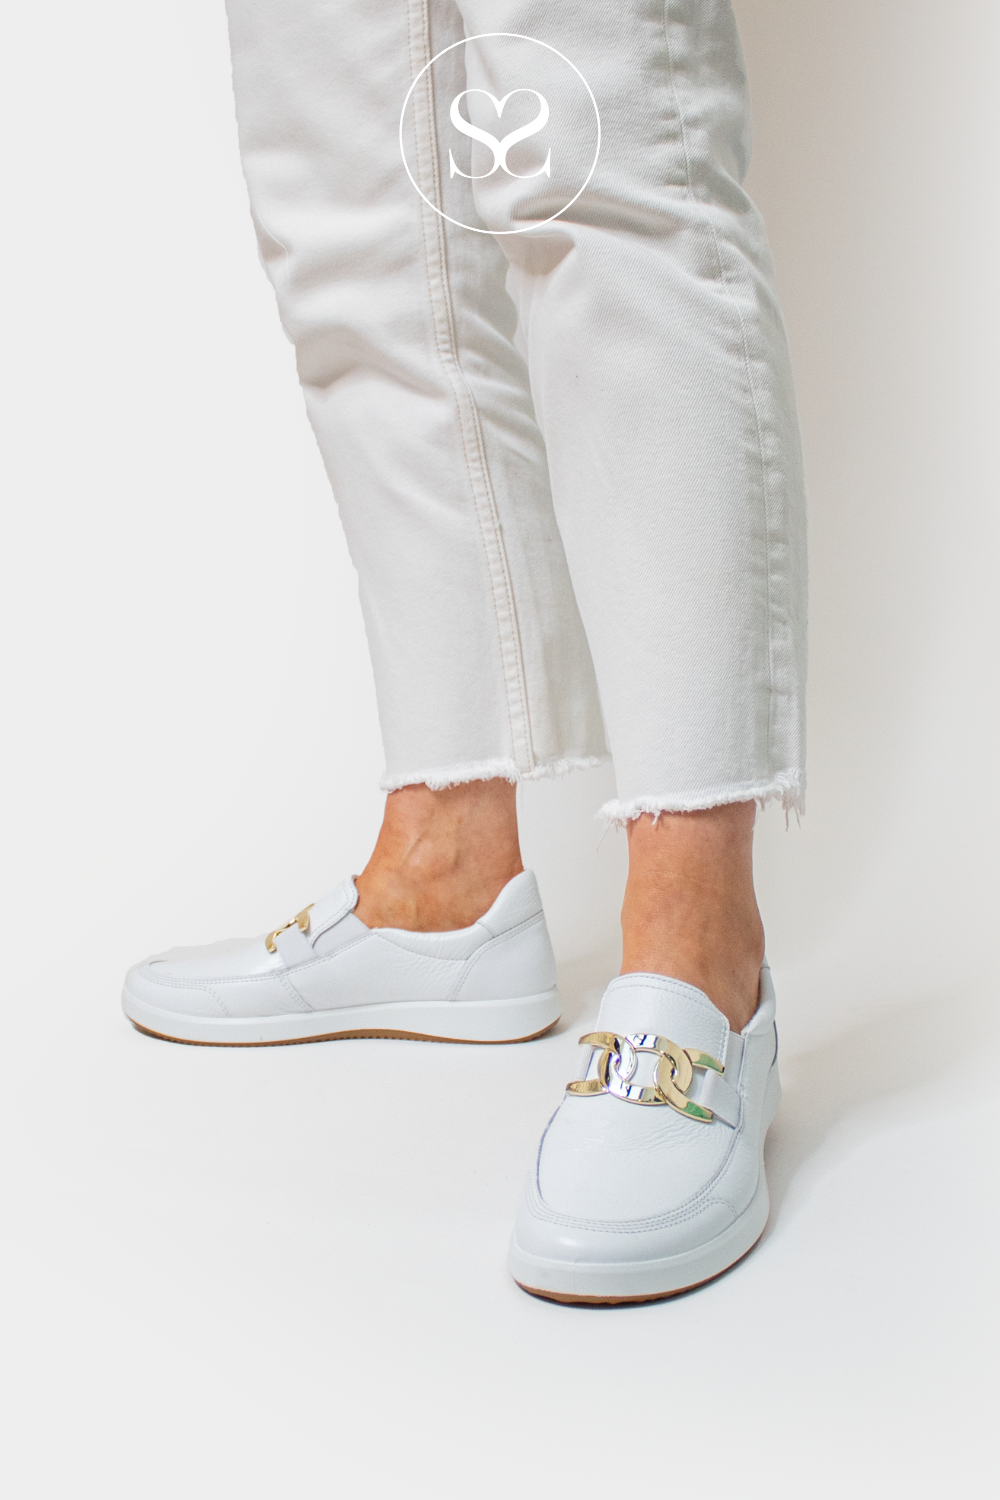 ARA 12-23911 WHITE LEATHER PULL ON TRAINER/LOAFER WITH GOLD BUCKLE DETAIL.